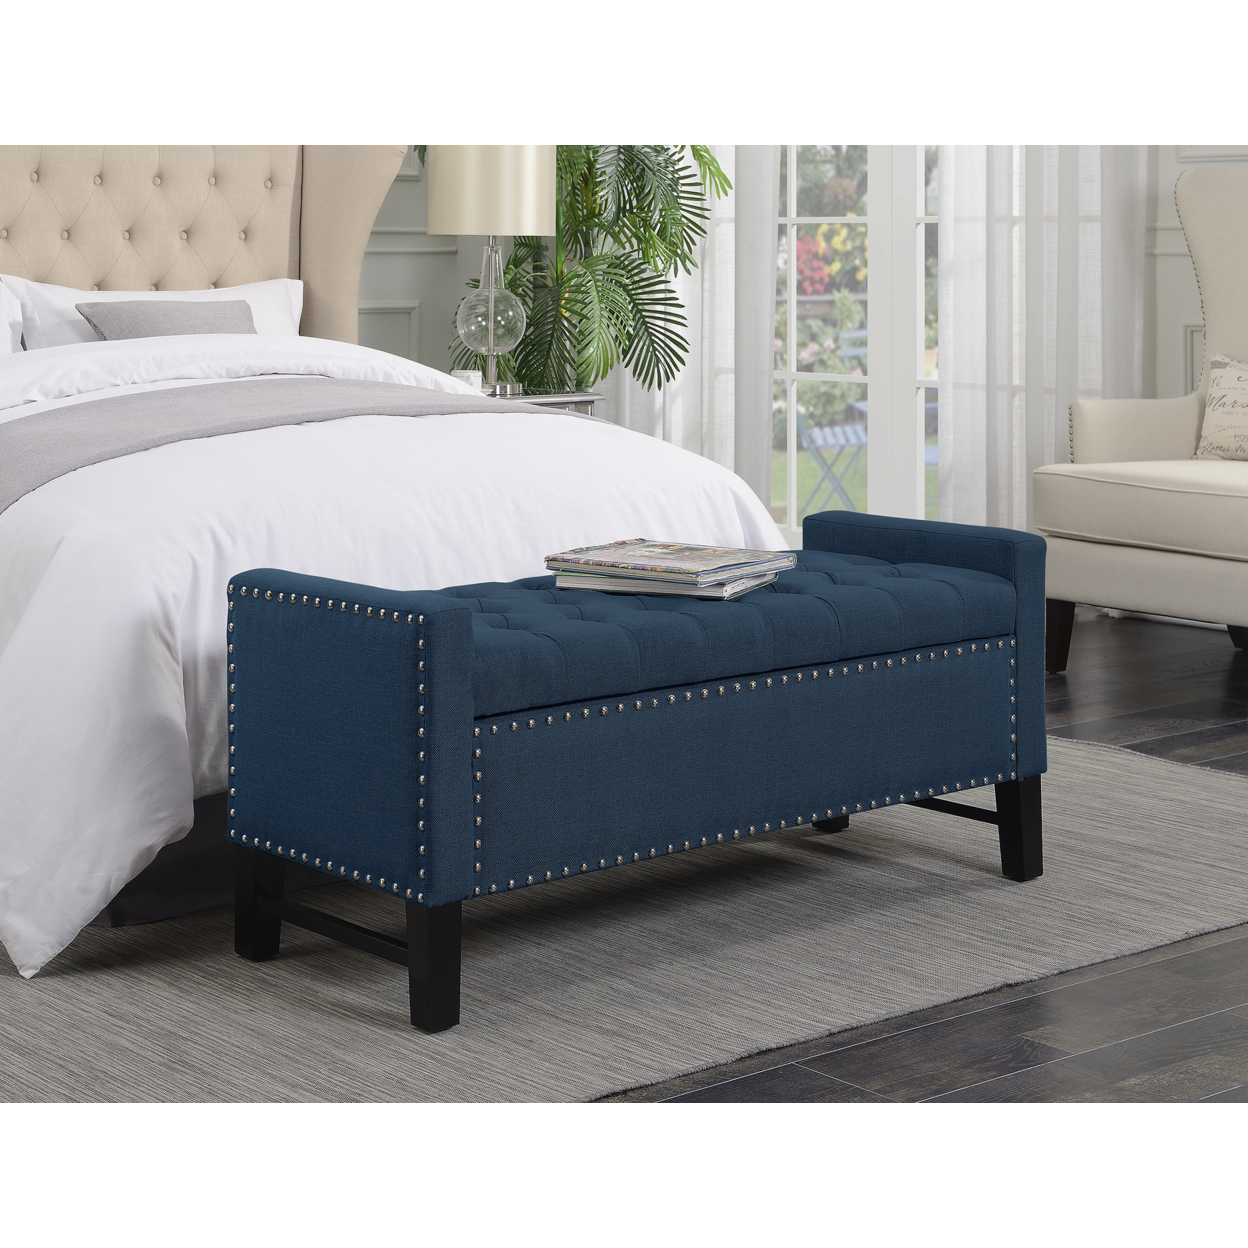 Michael Linen Modern Contemporary Button Tufted With Silver Nailheads Deco On Frame Storage Lid Bench - Dark Grey